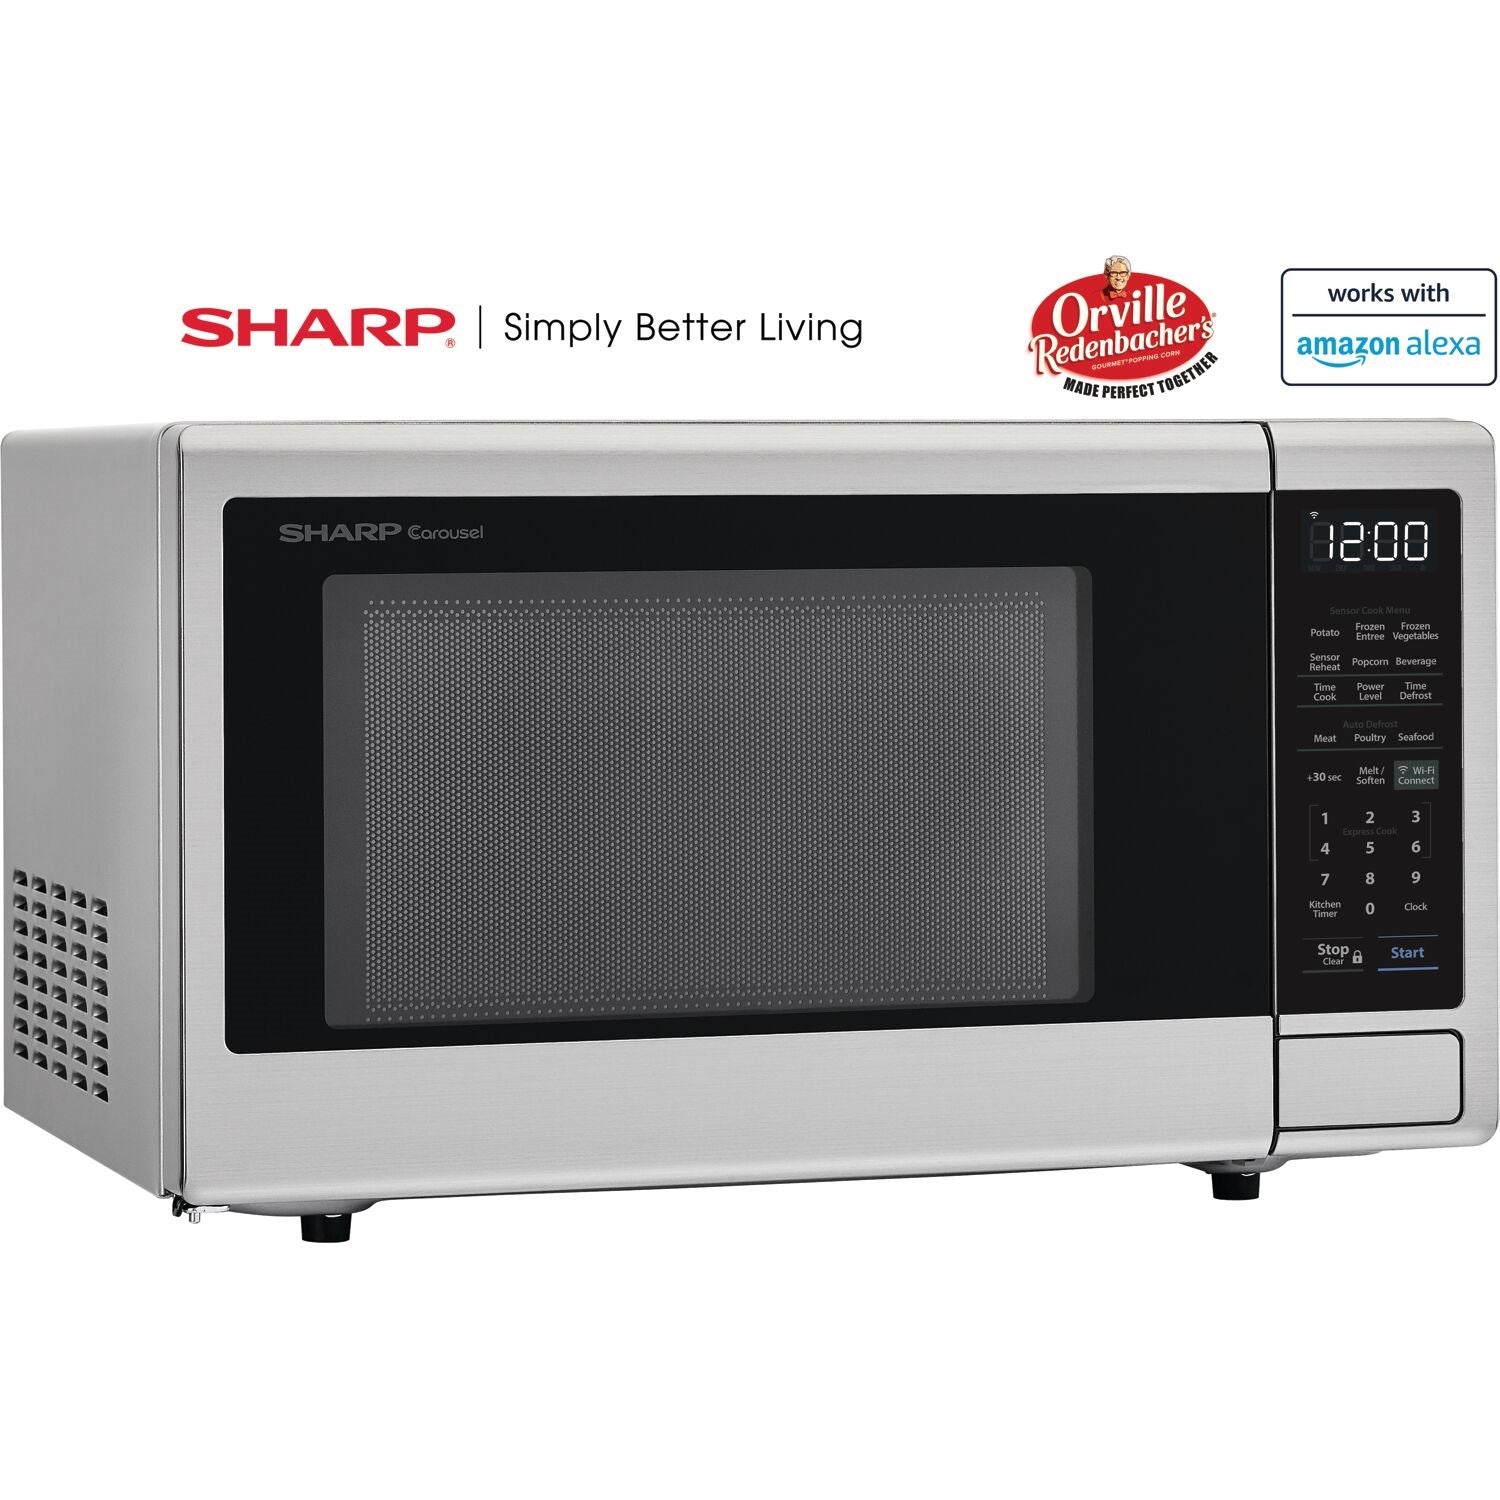 https://kitchenoasis.com/cdn/shop/files/Sharp-ZSMC1449FS-21-1_4-cu_-ft_-Stainless-Steel-1000W-Countertop-Microwave-Oven-With-Voice-Control-Alexa-enabled-Technology-6.jpg?v=1685850378&width=1946